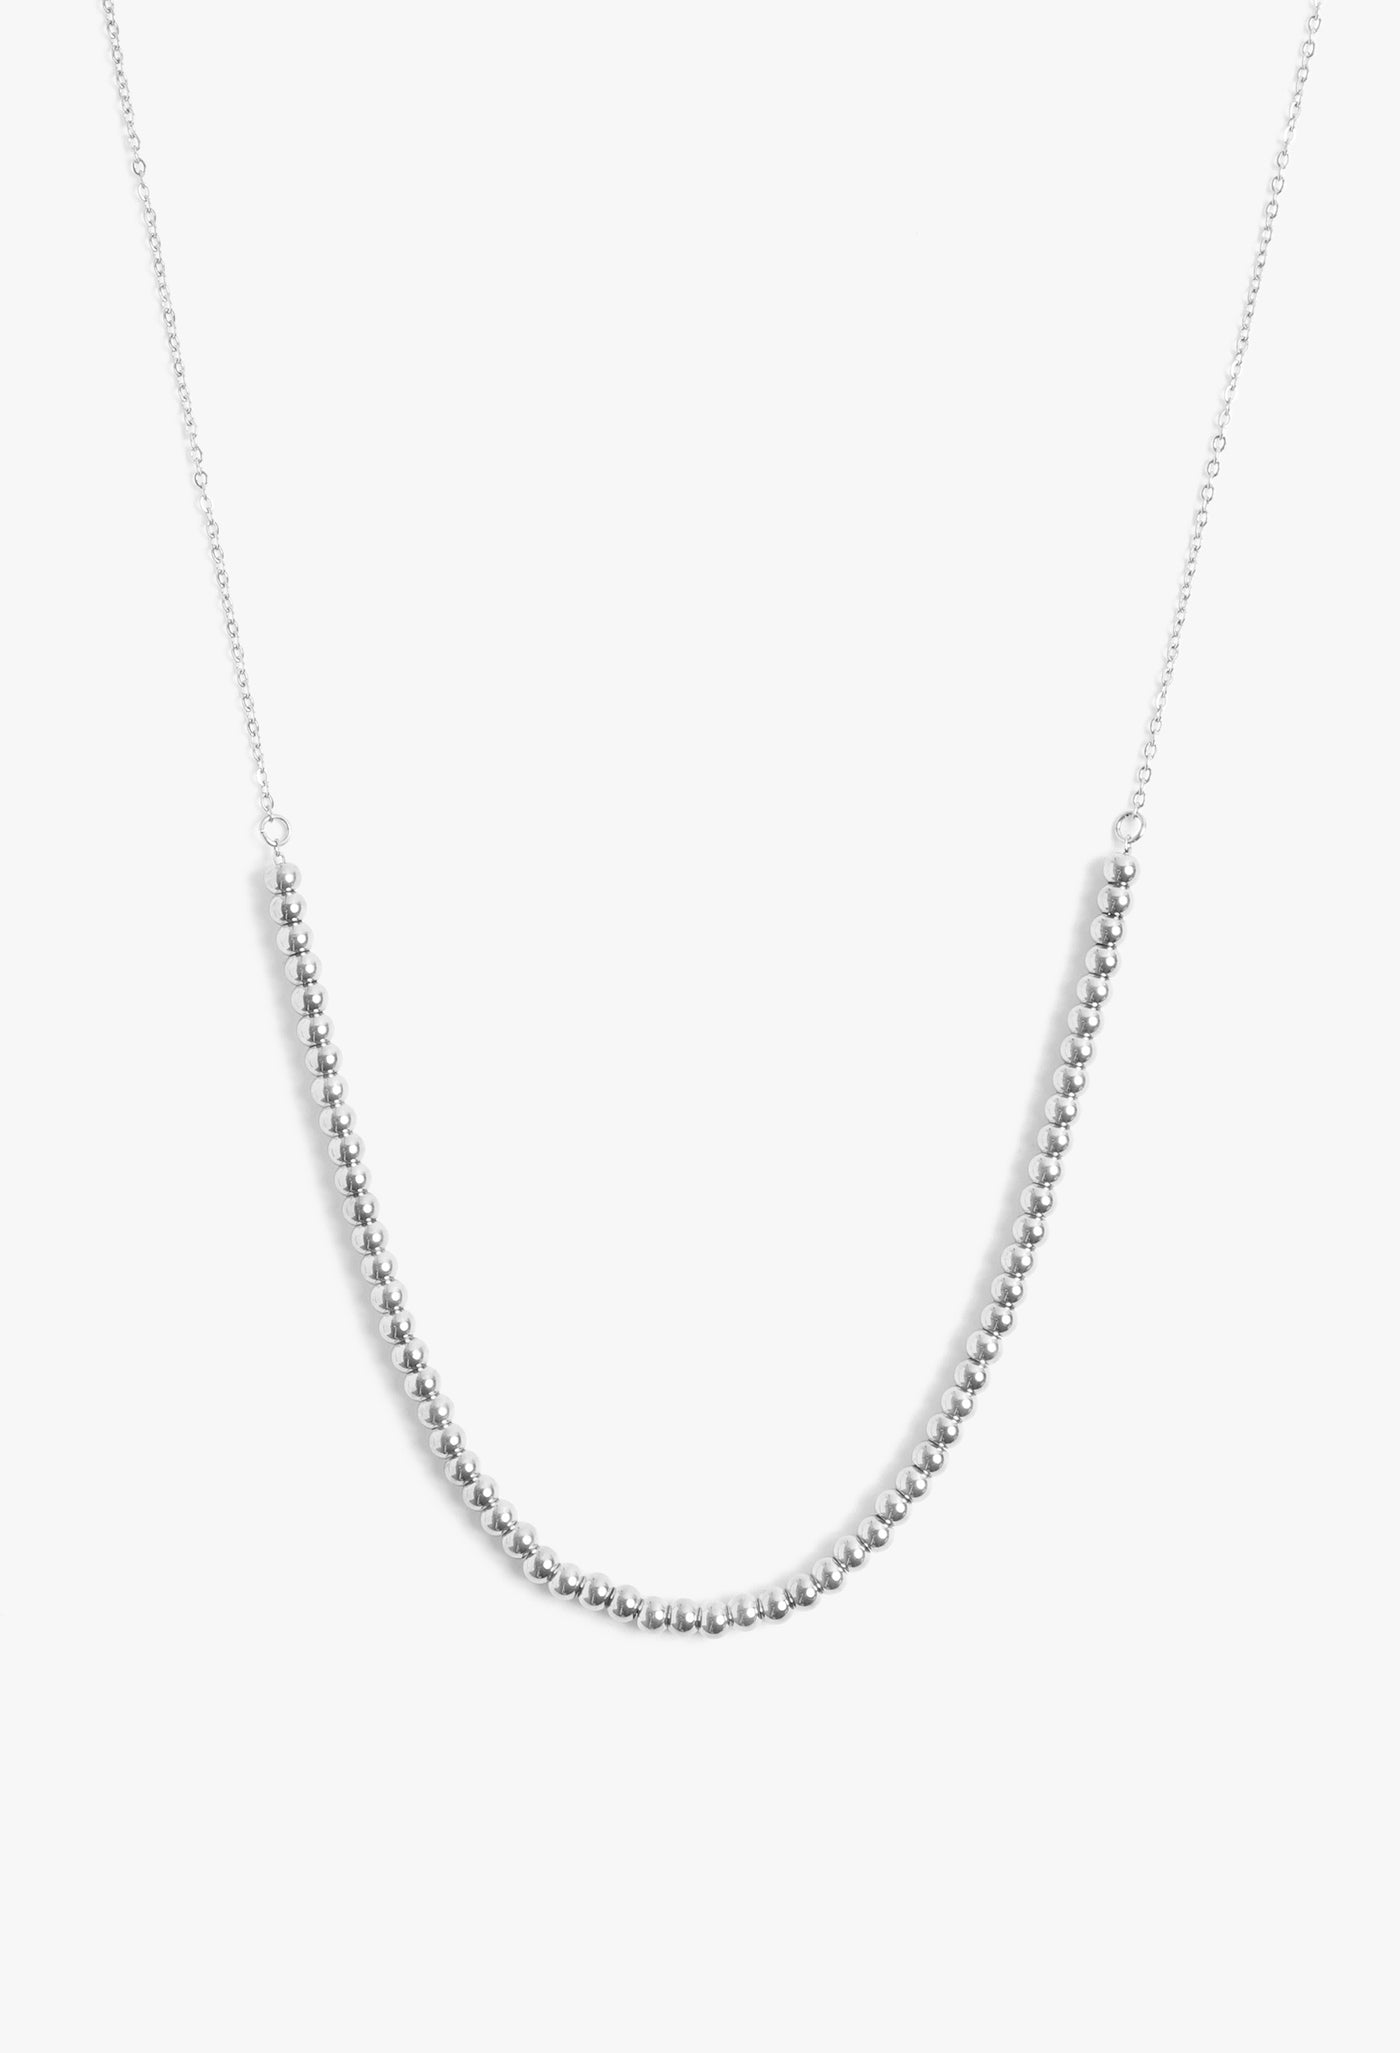 Marrin Costello Jewelry Crown Chain dainty dot necklace with lobster clasp closure and extender. Waterproof, sustainable, hypoallergenic. Polished stainless steel.